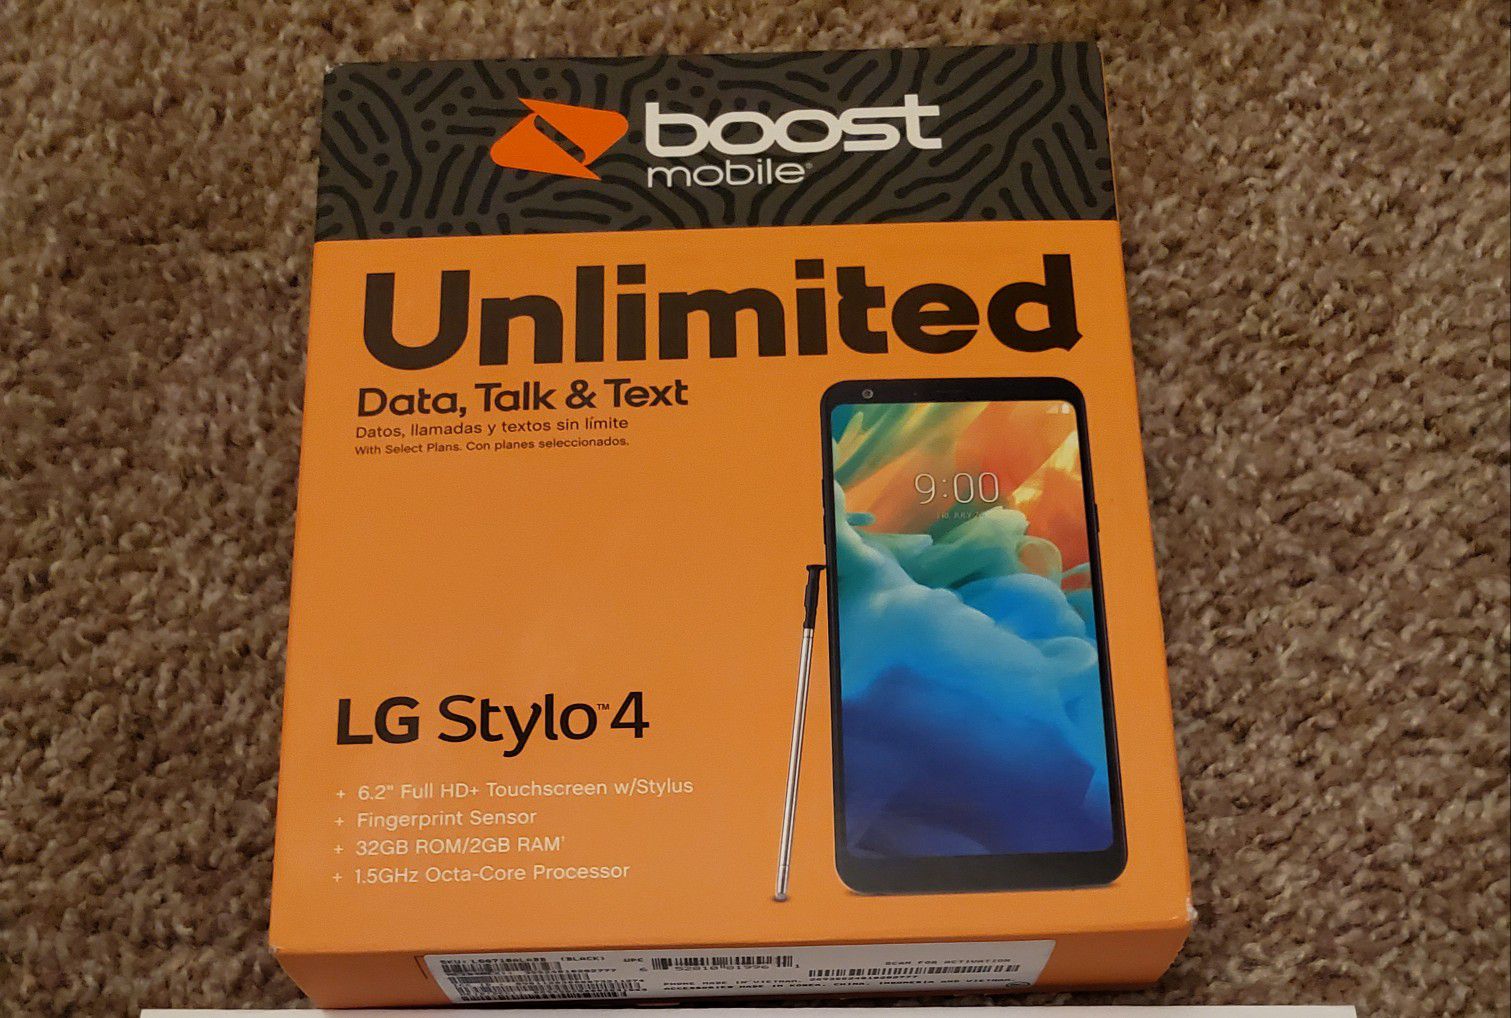 LG Stylo 4 Boost Mobile